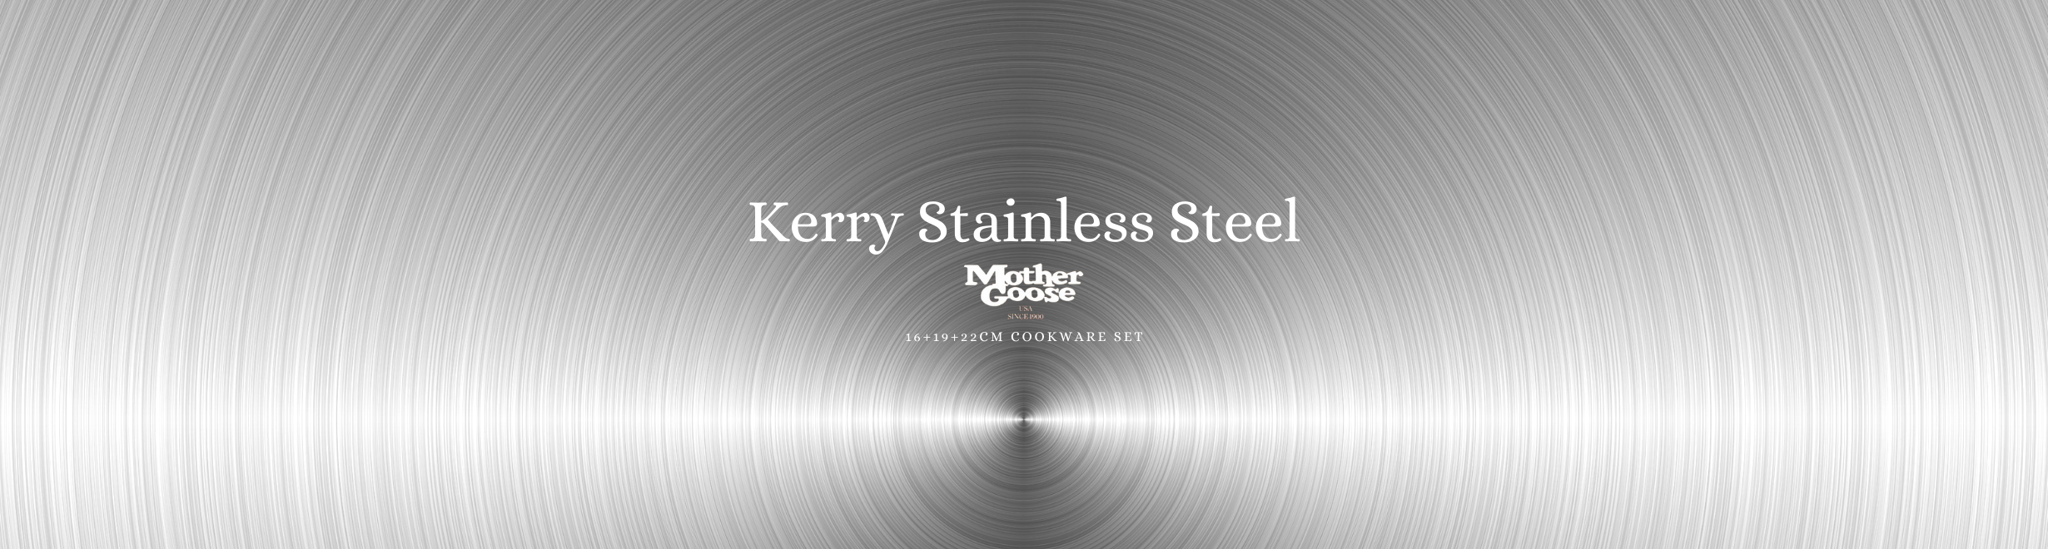 KERRY STAINLESS STEEL